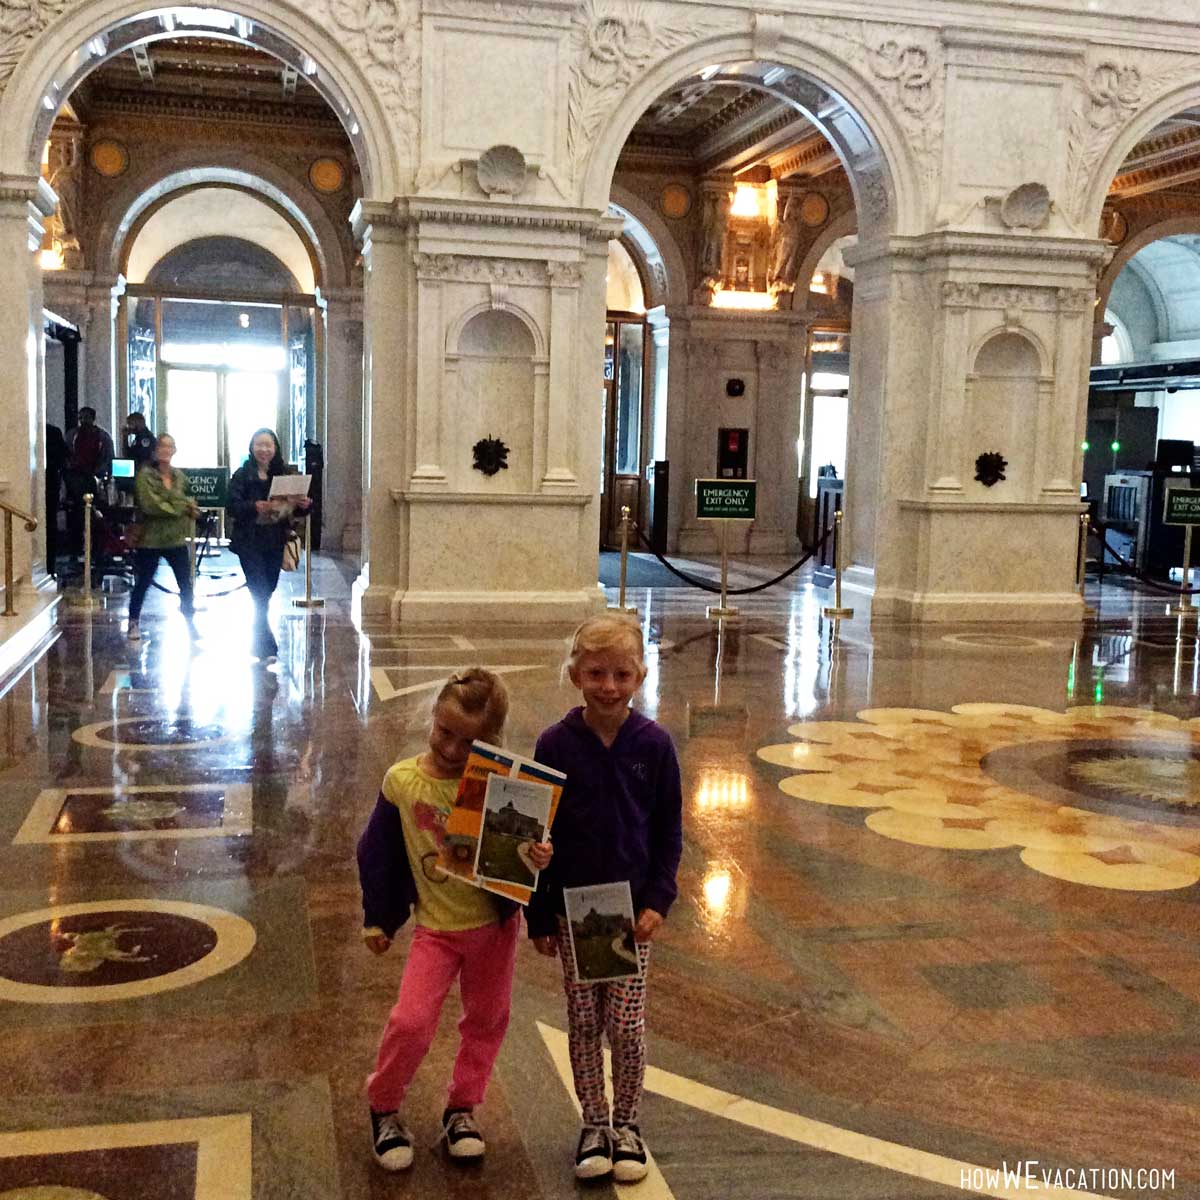 Kids at the Library of Congress